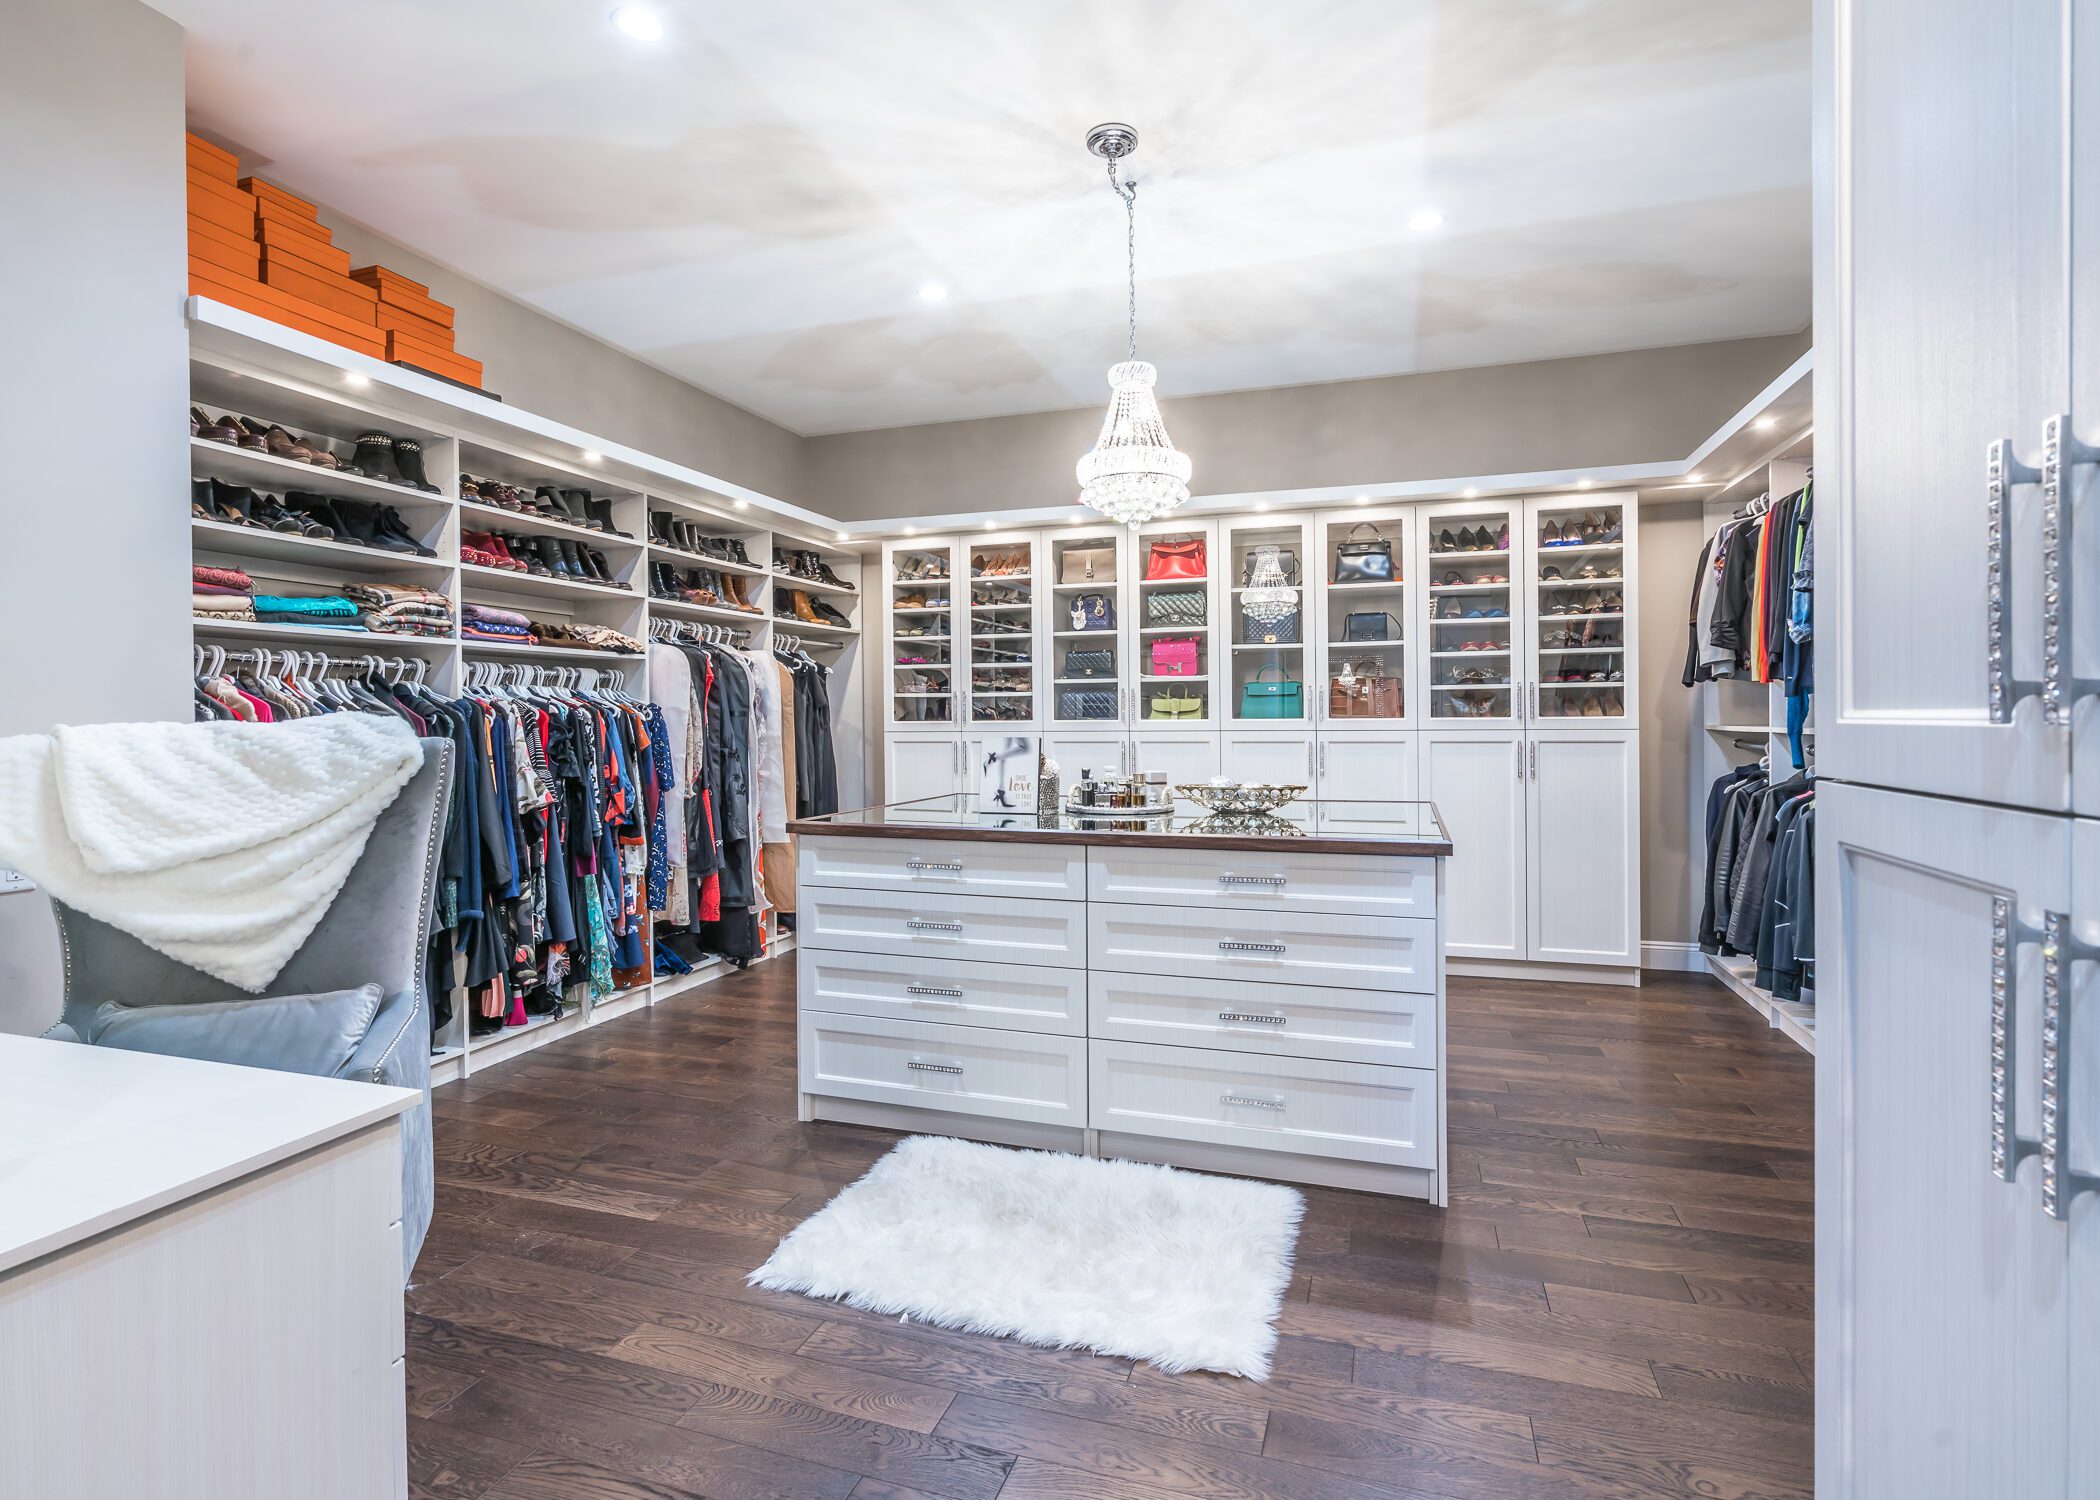 6 Tips for Designing a Luxurious Walk-In Closet